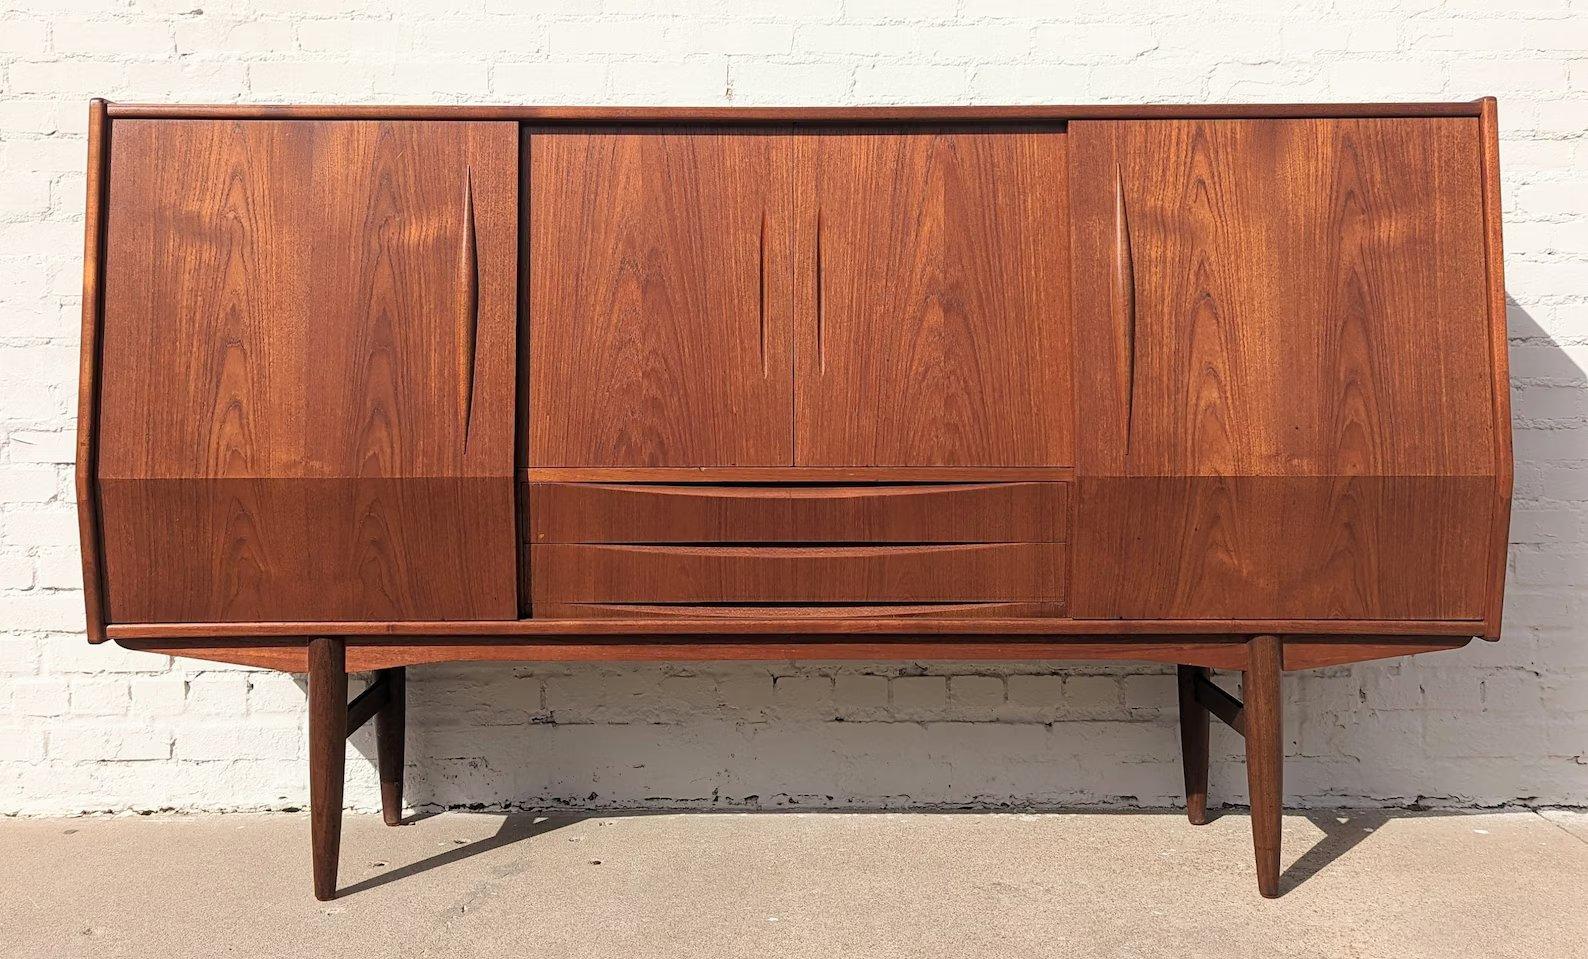 Mid Century Danish Modern Teak Cocktail Cabinet

Above average vintage condition and structurally sound. Has some expected slight finish wear and scratching. Has a couple small dings and discolorations on top. Outdoor listing pictures might appear